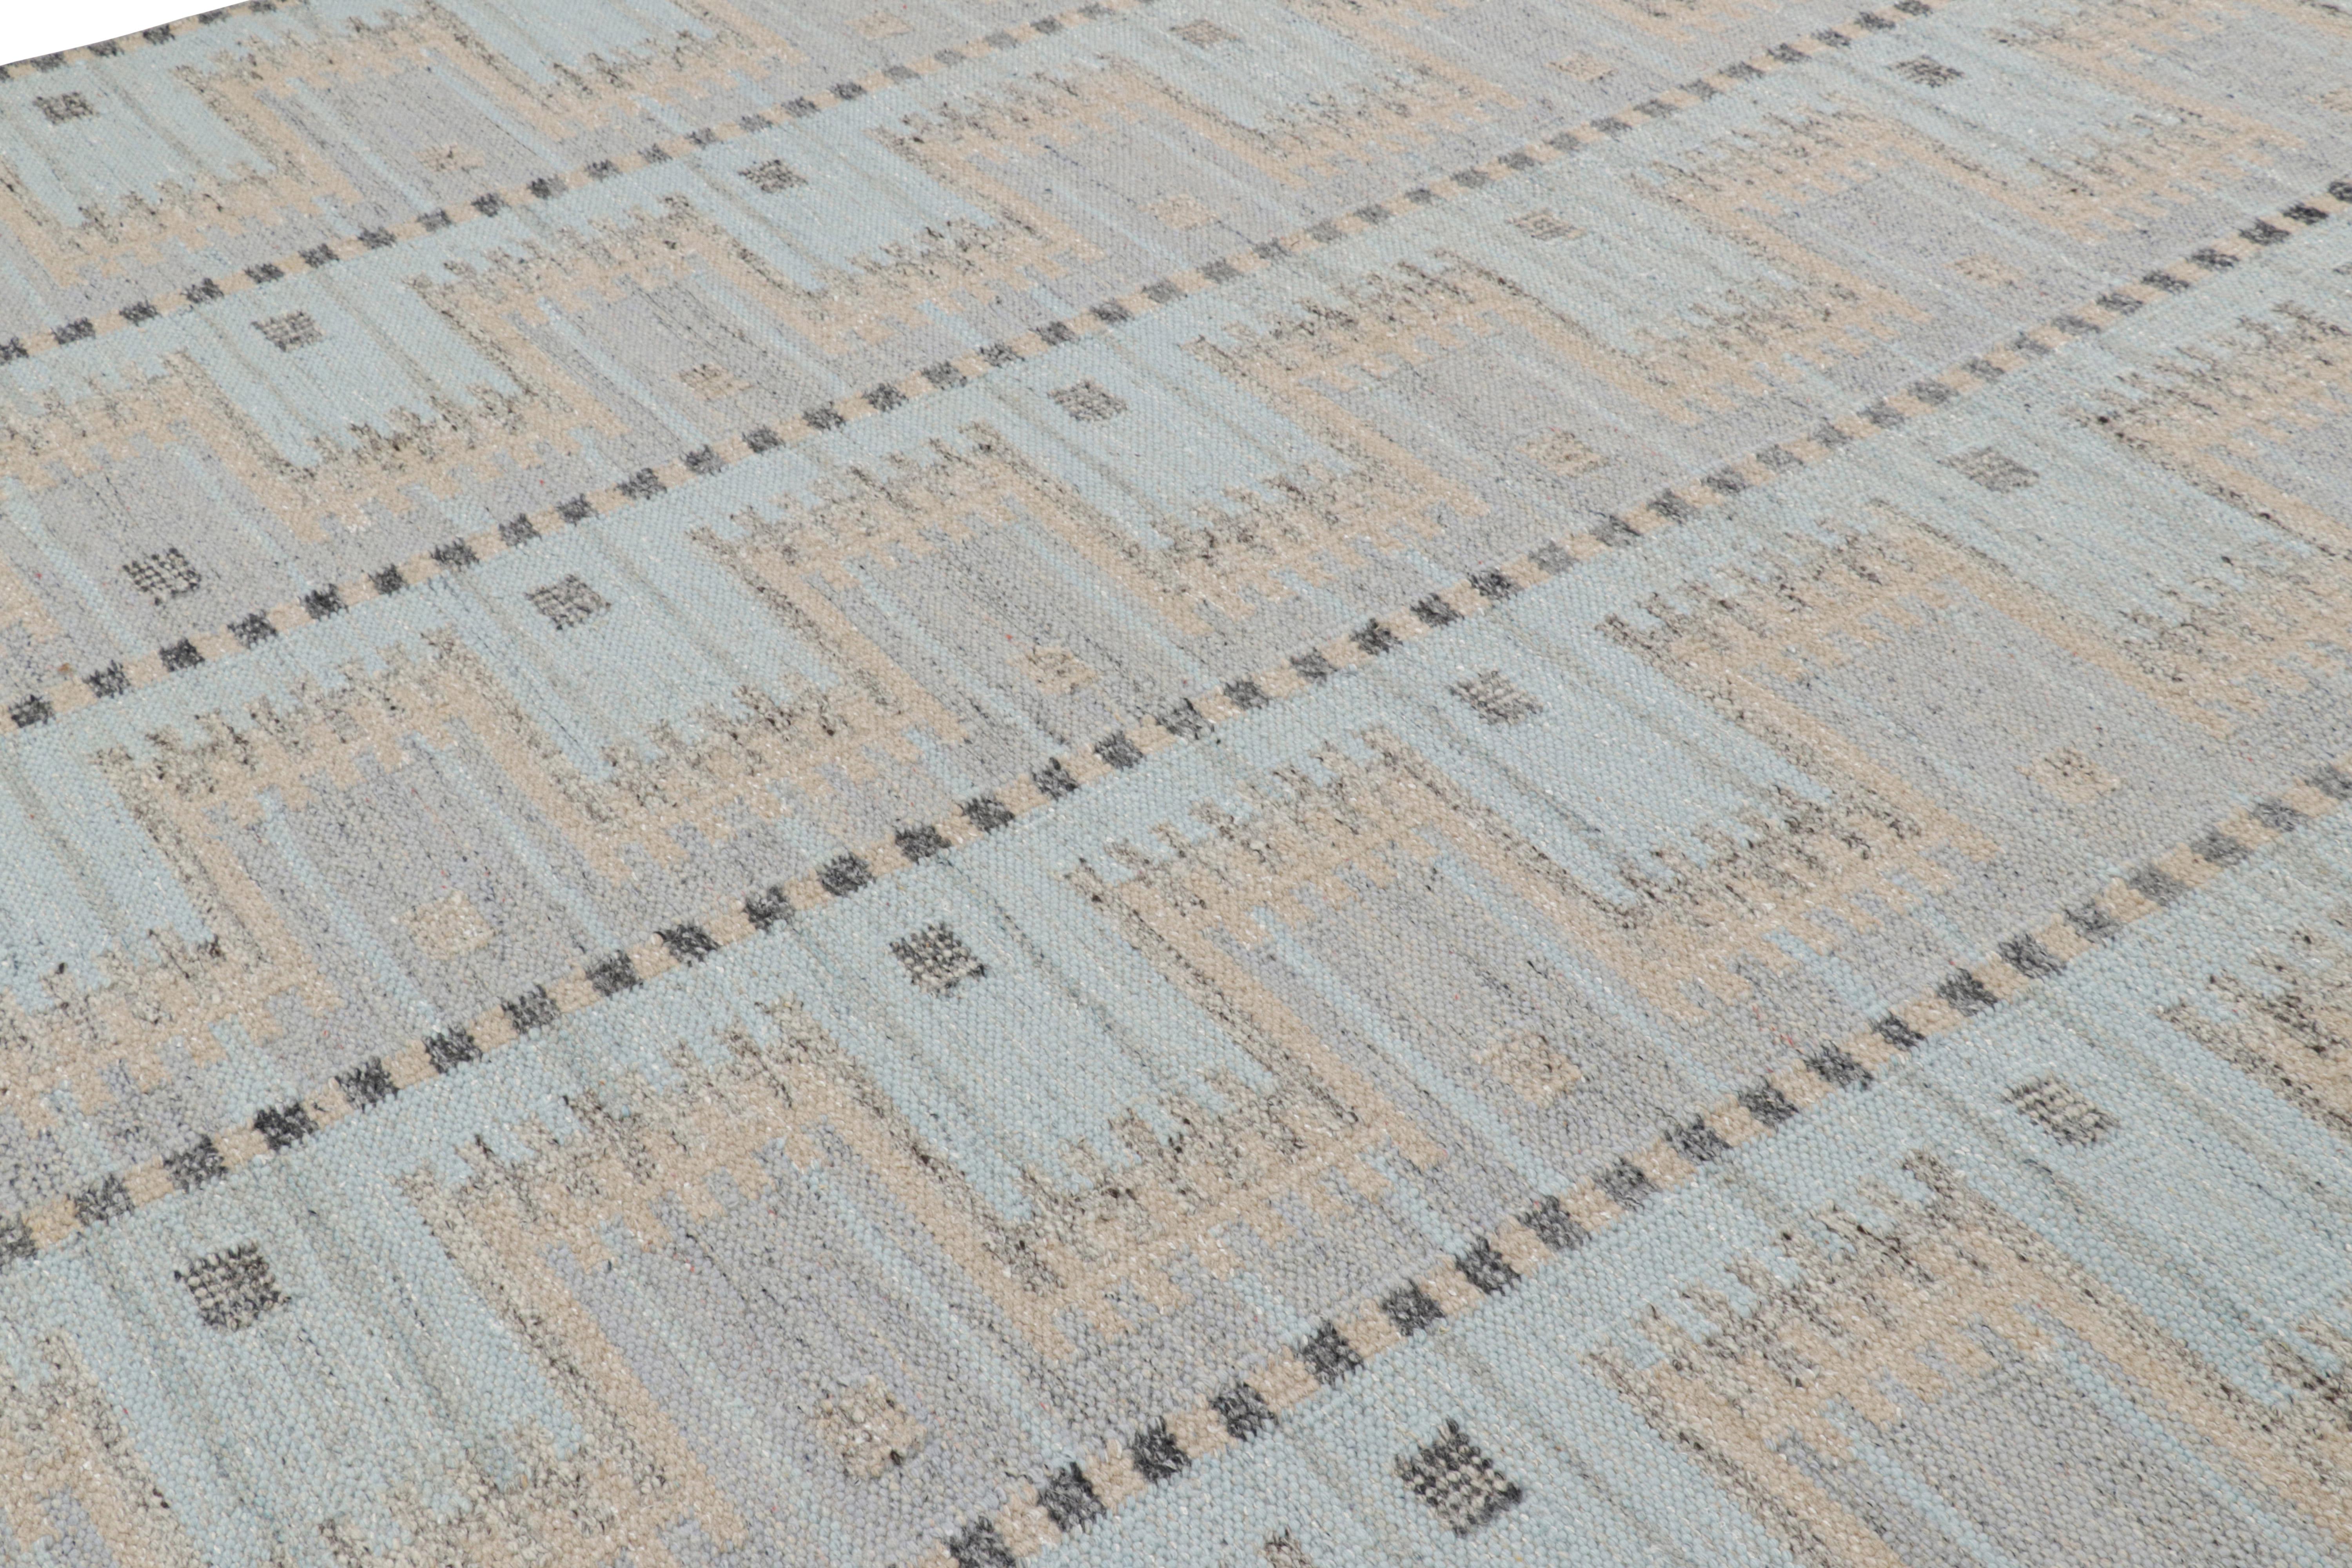 This 9x12 Swedish-style modern rug is a bold new addition to Rug & Kilim’s Scandinavian collection. Handwoven in a wool flatweave with undyed natural yarns as well, its design is inspired by Swedish minimalist designs.

On the Design: 

This new